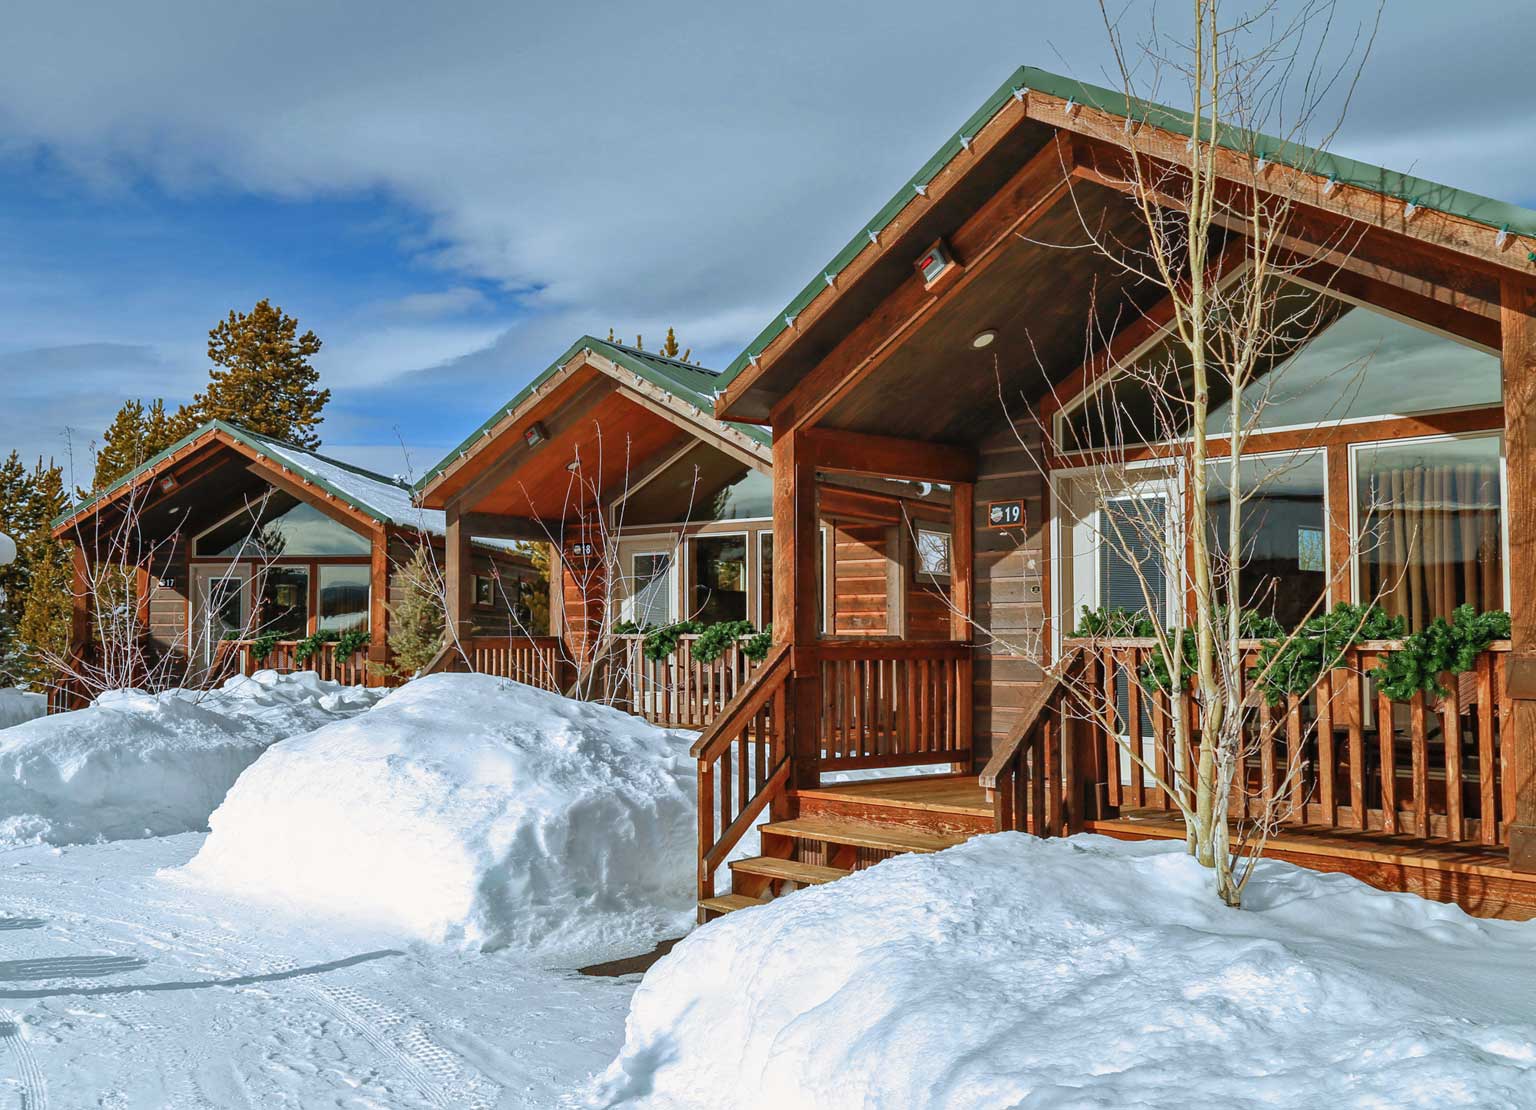 The Explorer Cabins in Yellowstone during winter